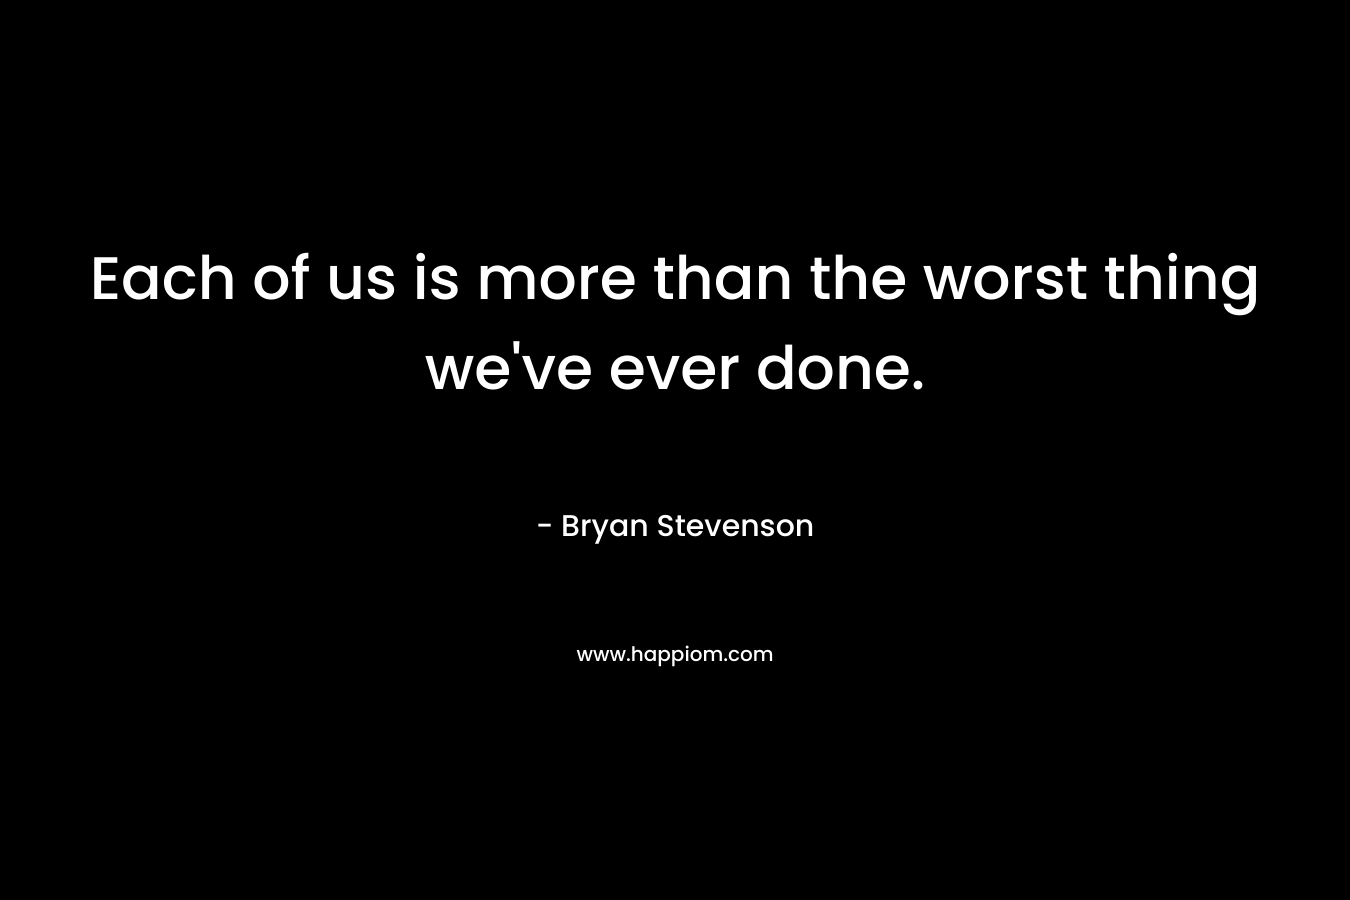 Each of us is more than the worst thing we’ve ever done. – Bryan Stevenson